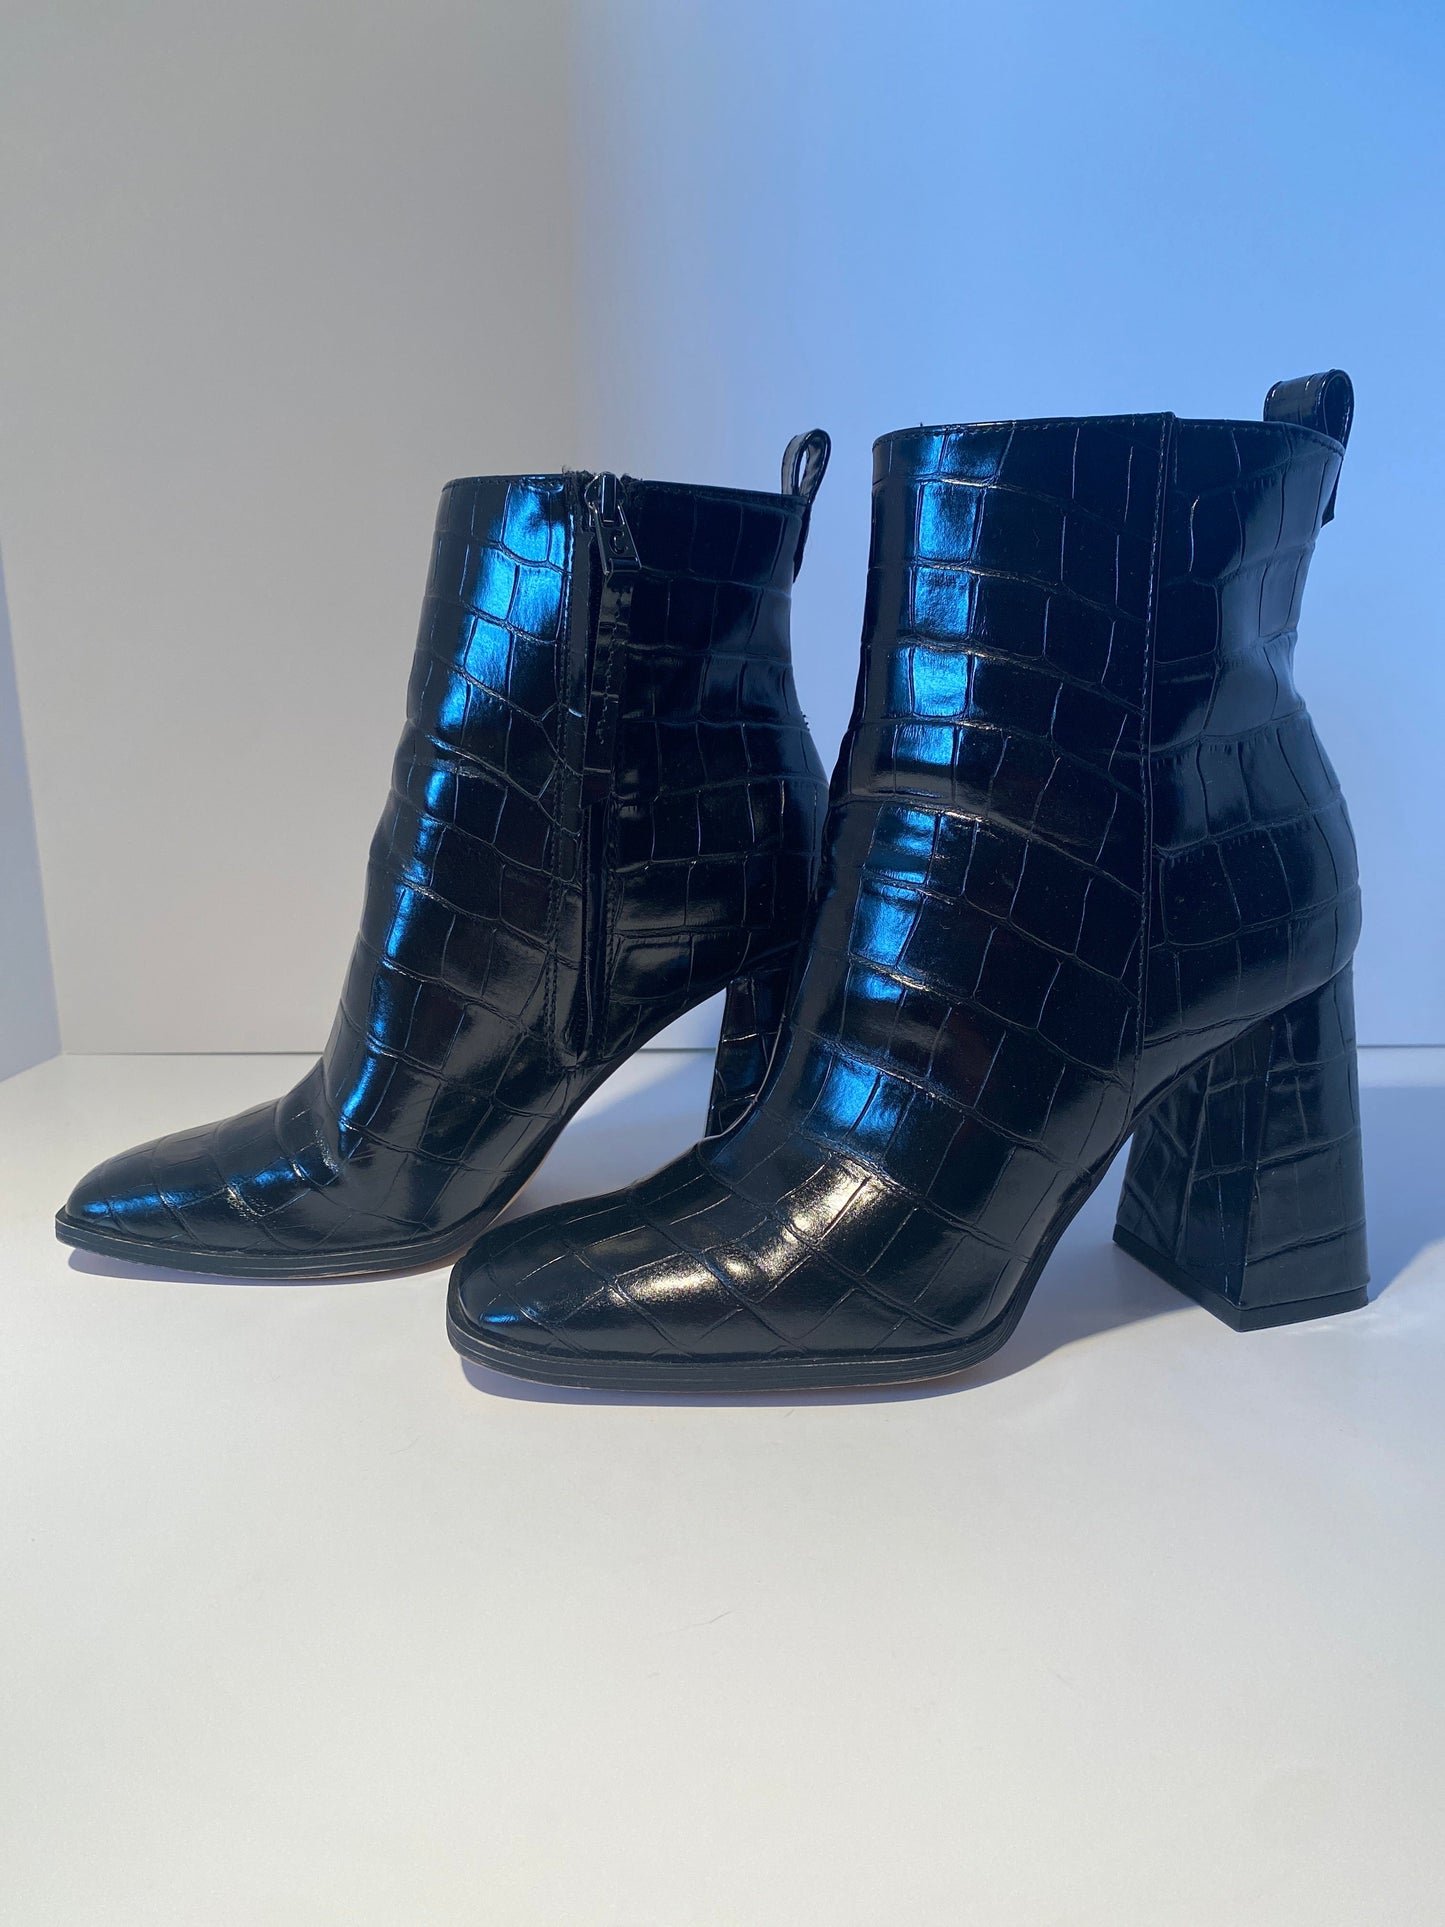 Boots Ankle Heels By Sam Edelman  Size: 6.5